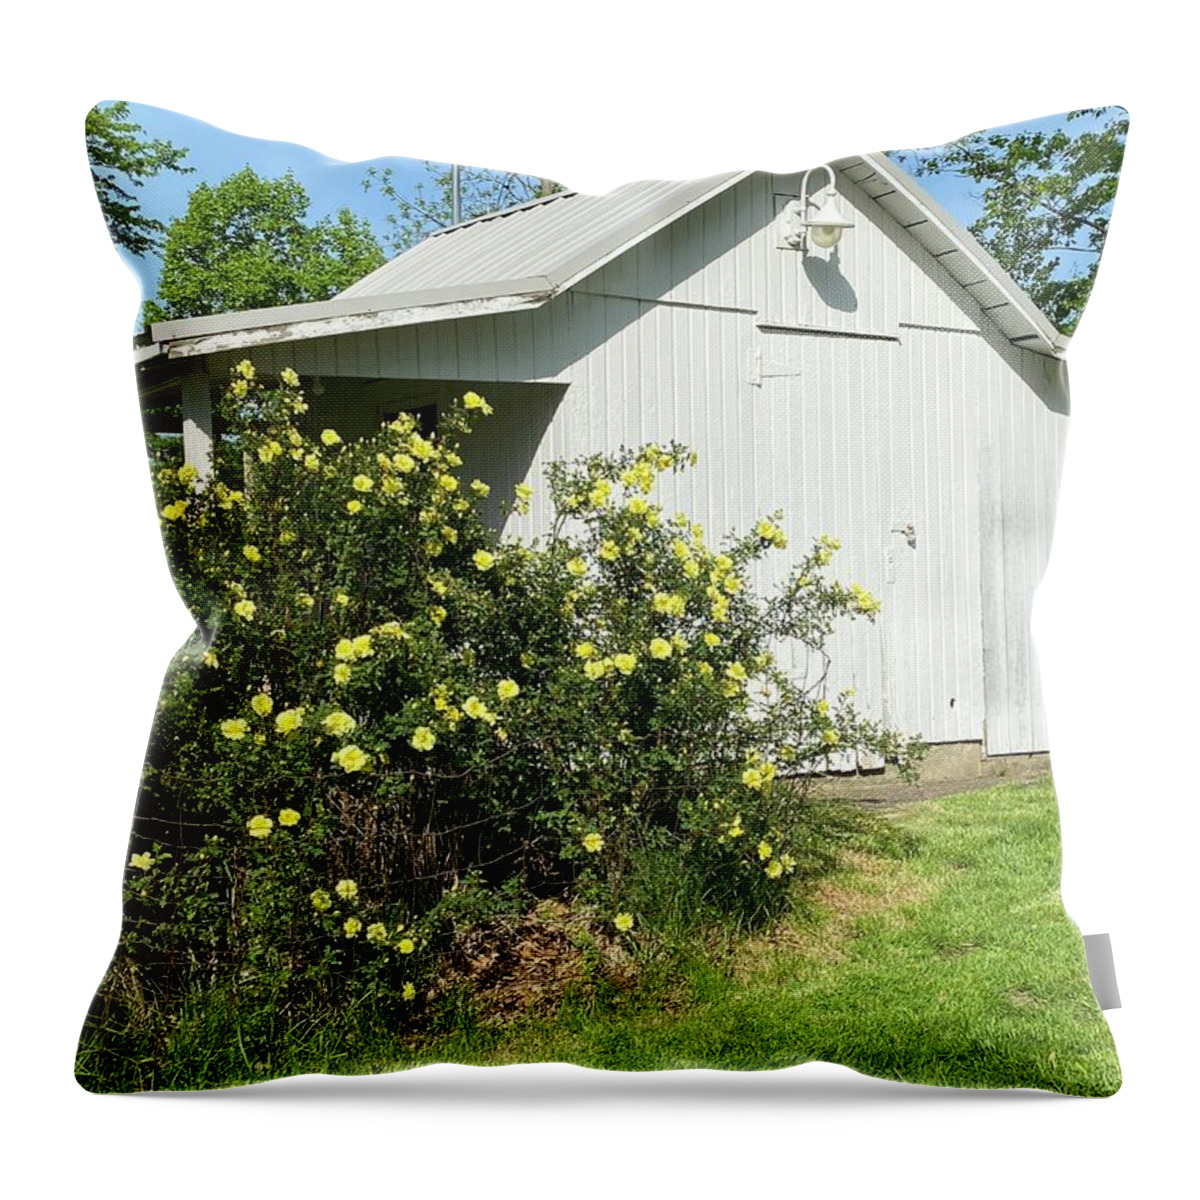  Throw Pillow featuring the painting Shed by Anitra Boyt